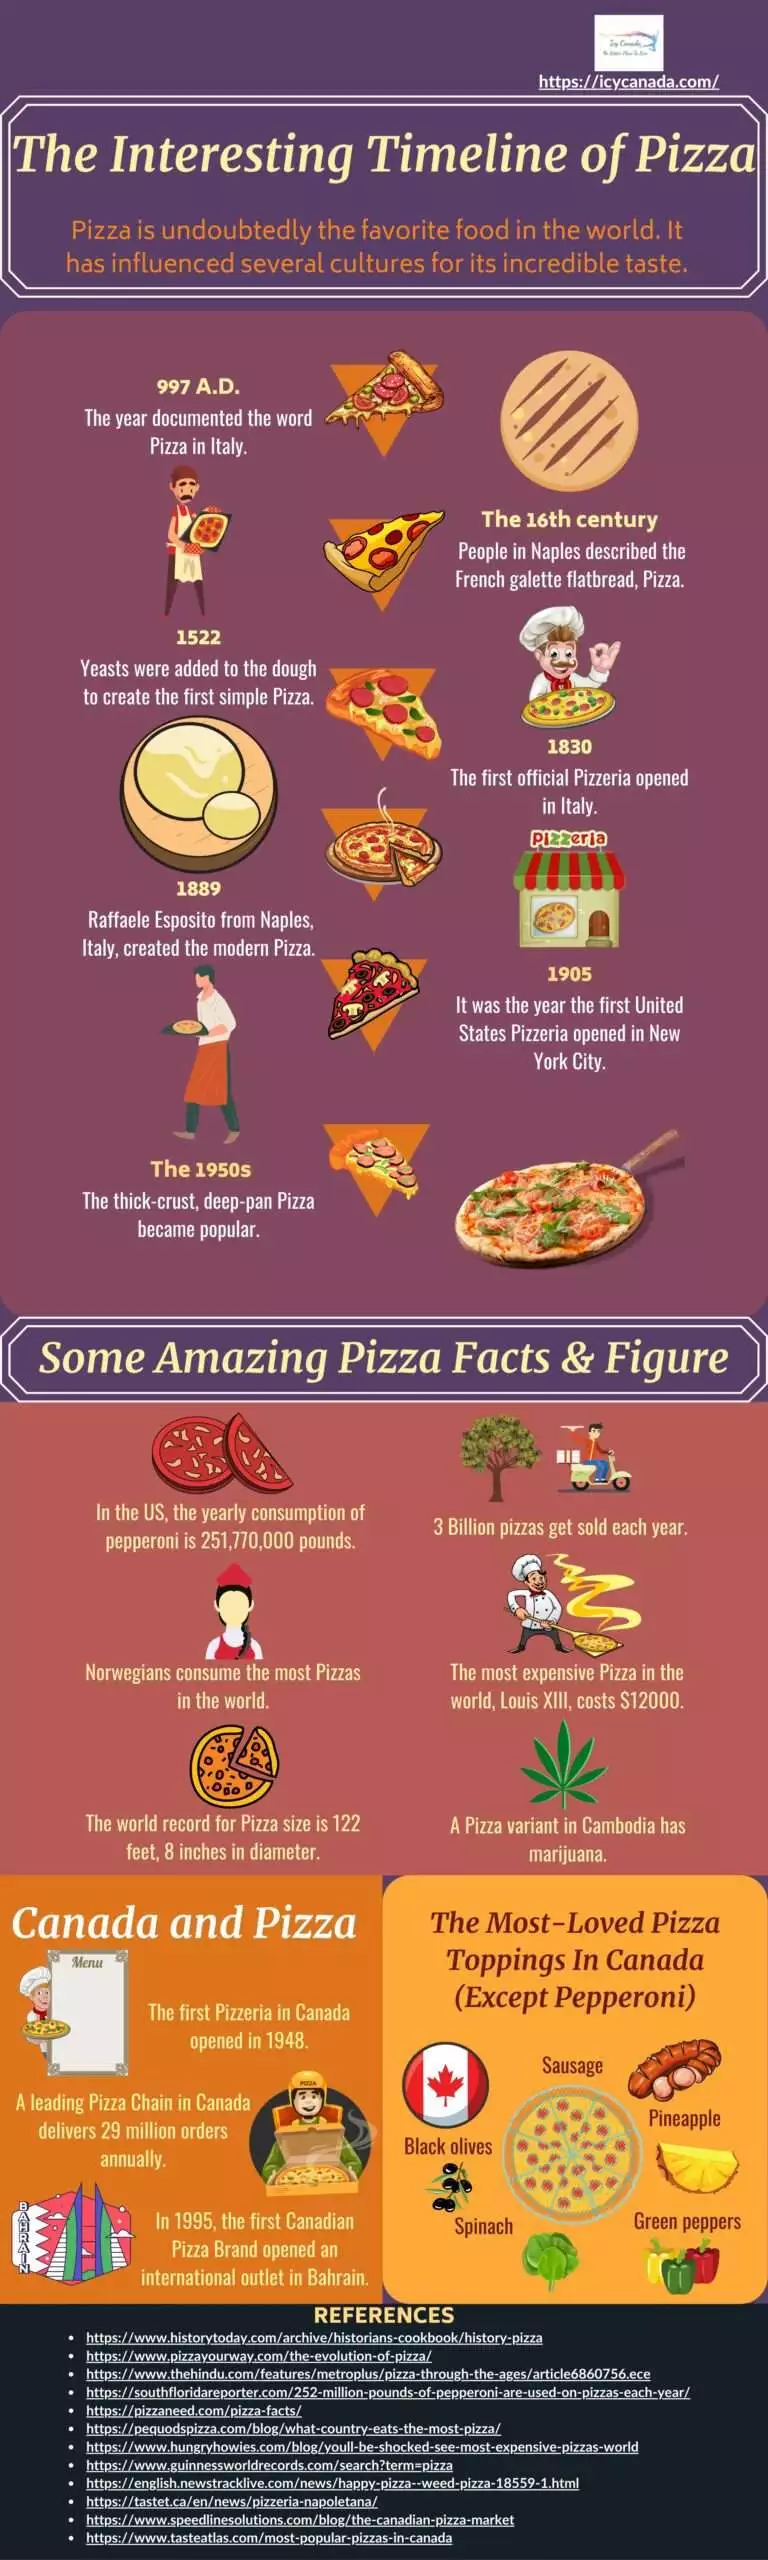 The Interesting Timeline of Pizza